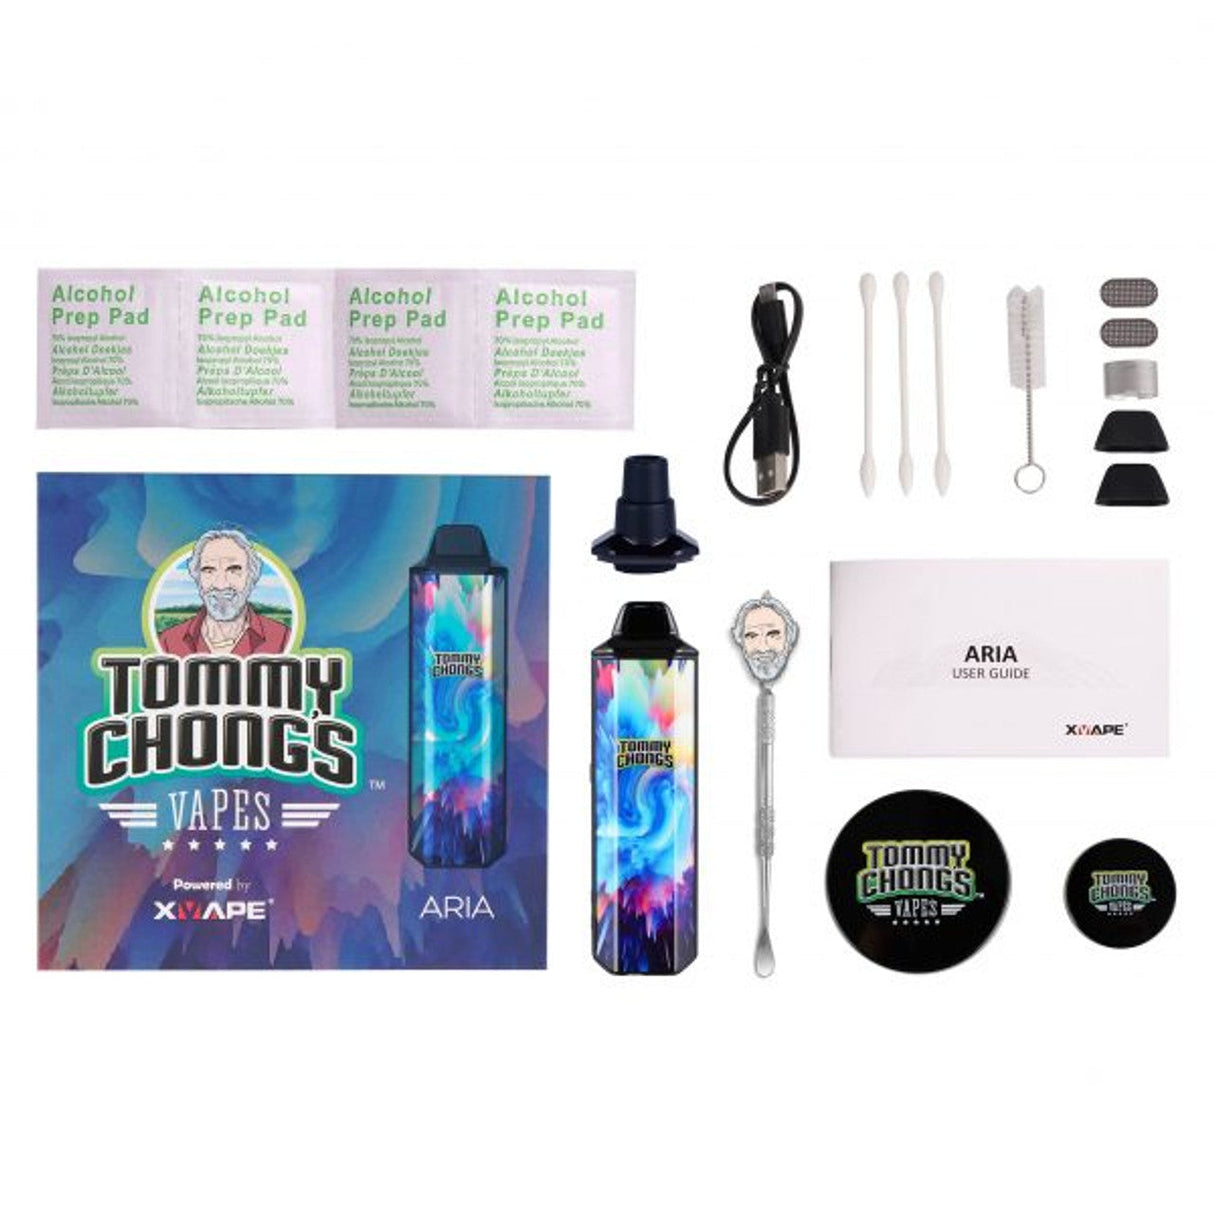 XVape Tommy Chong Aria Vaporizer Kit with accessories, multicolor design, compact and portable